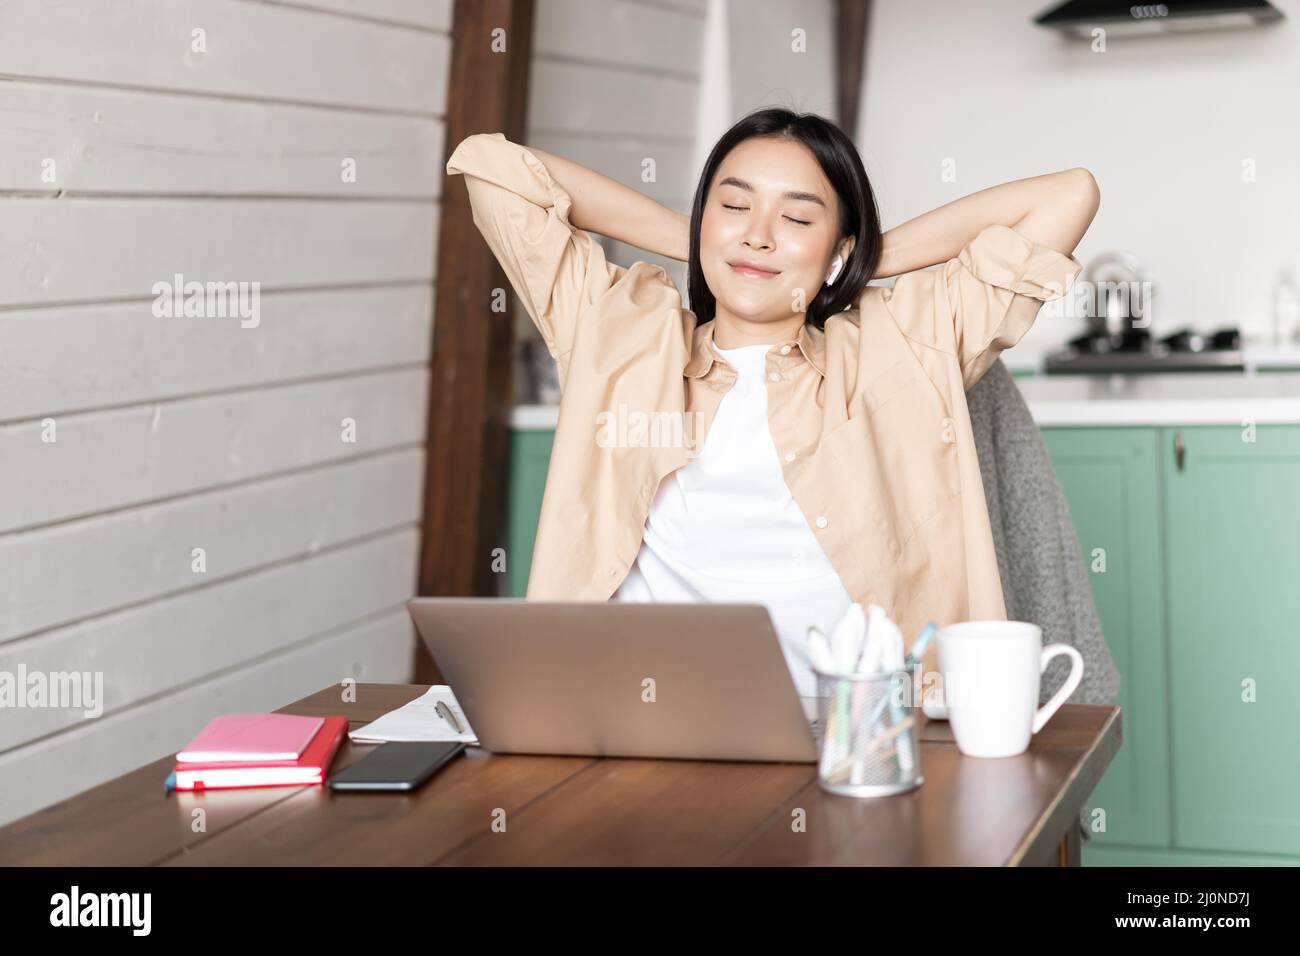 Work from home and distance education concept. Young asian girl finished online course, stretching and lay back on chair, restin Stock Photo